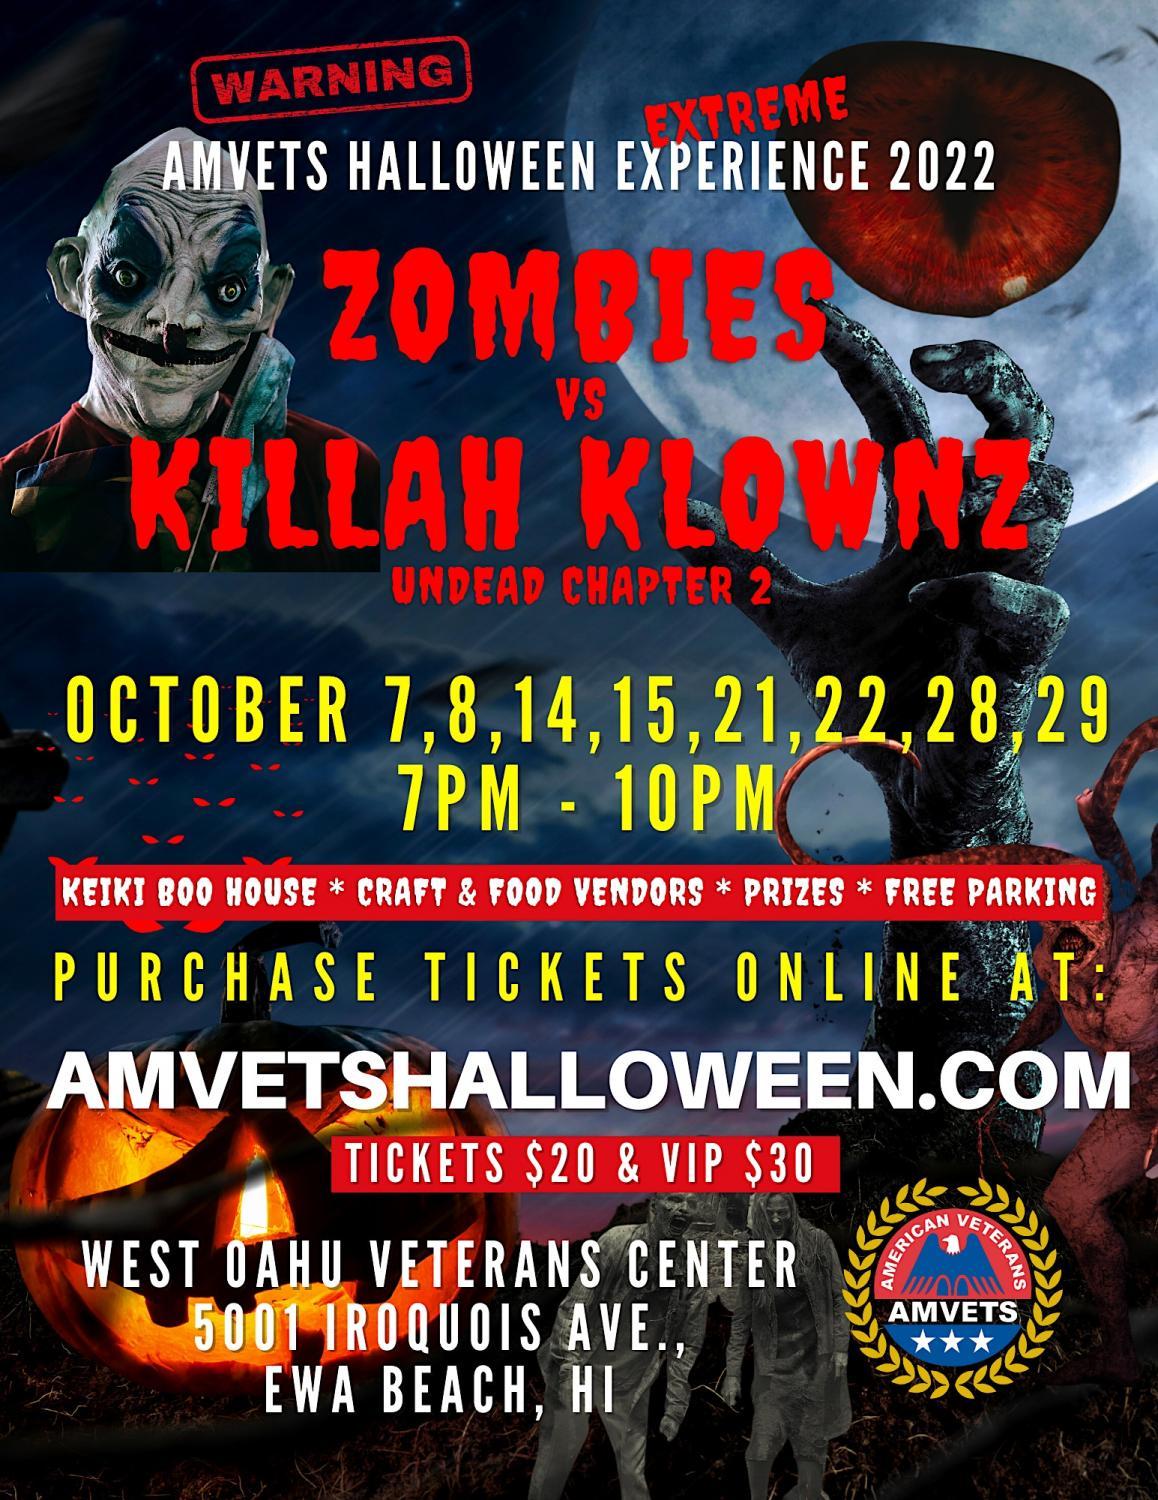 Halloween Extreme Experience - Zombies vs Killah Klownz Undead Chapter 2
Fri Oct 21, 7:00 PM - Fri Oct 21, 10:00 PM
in 2 days